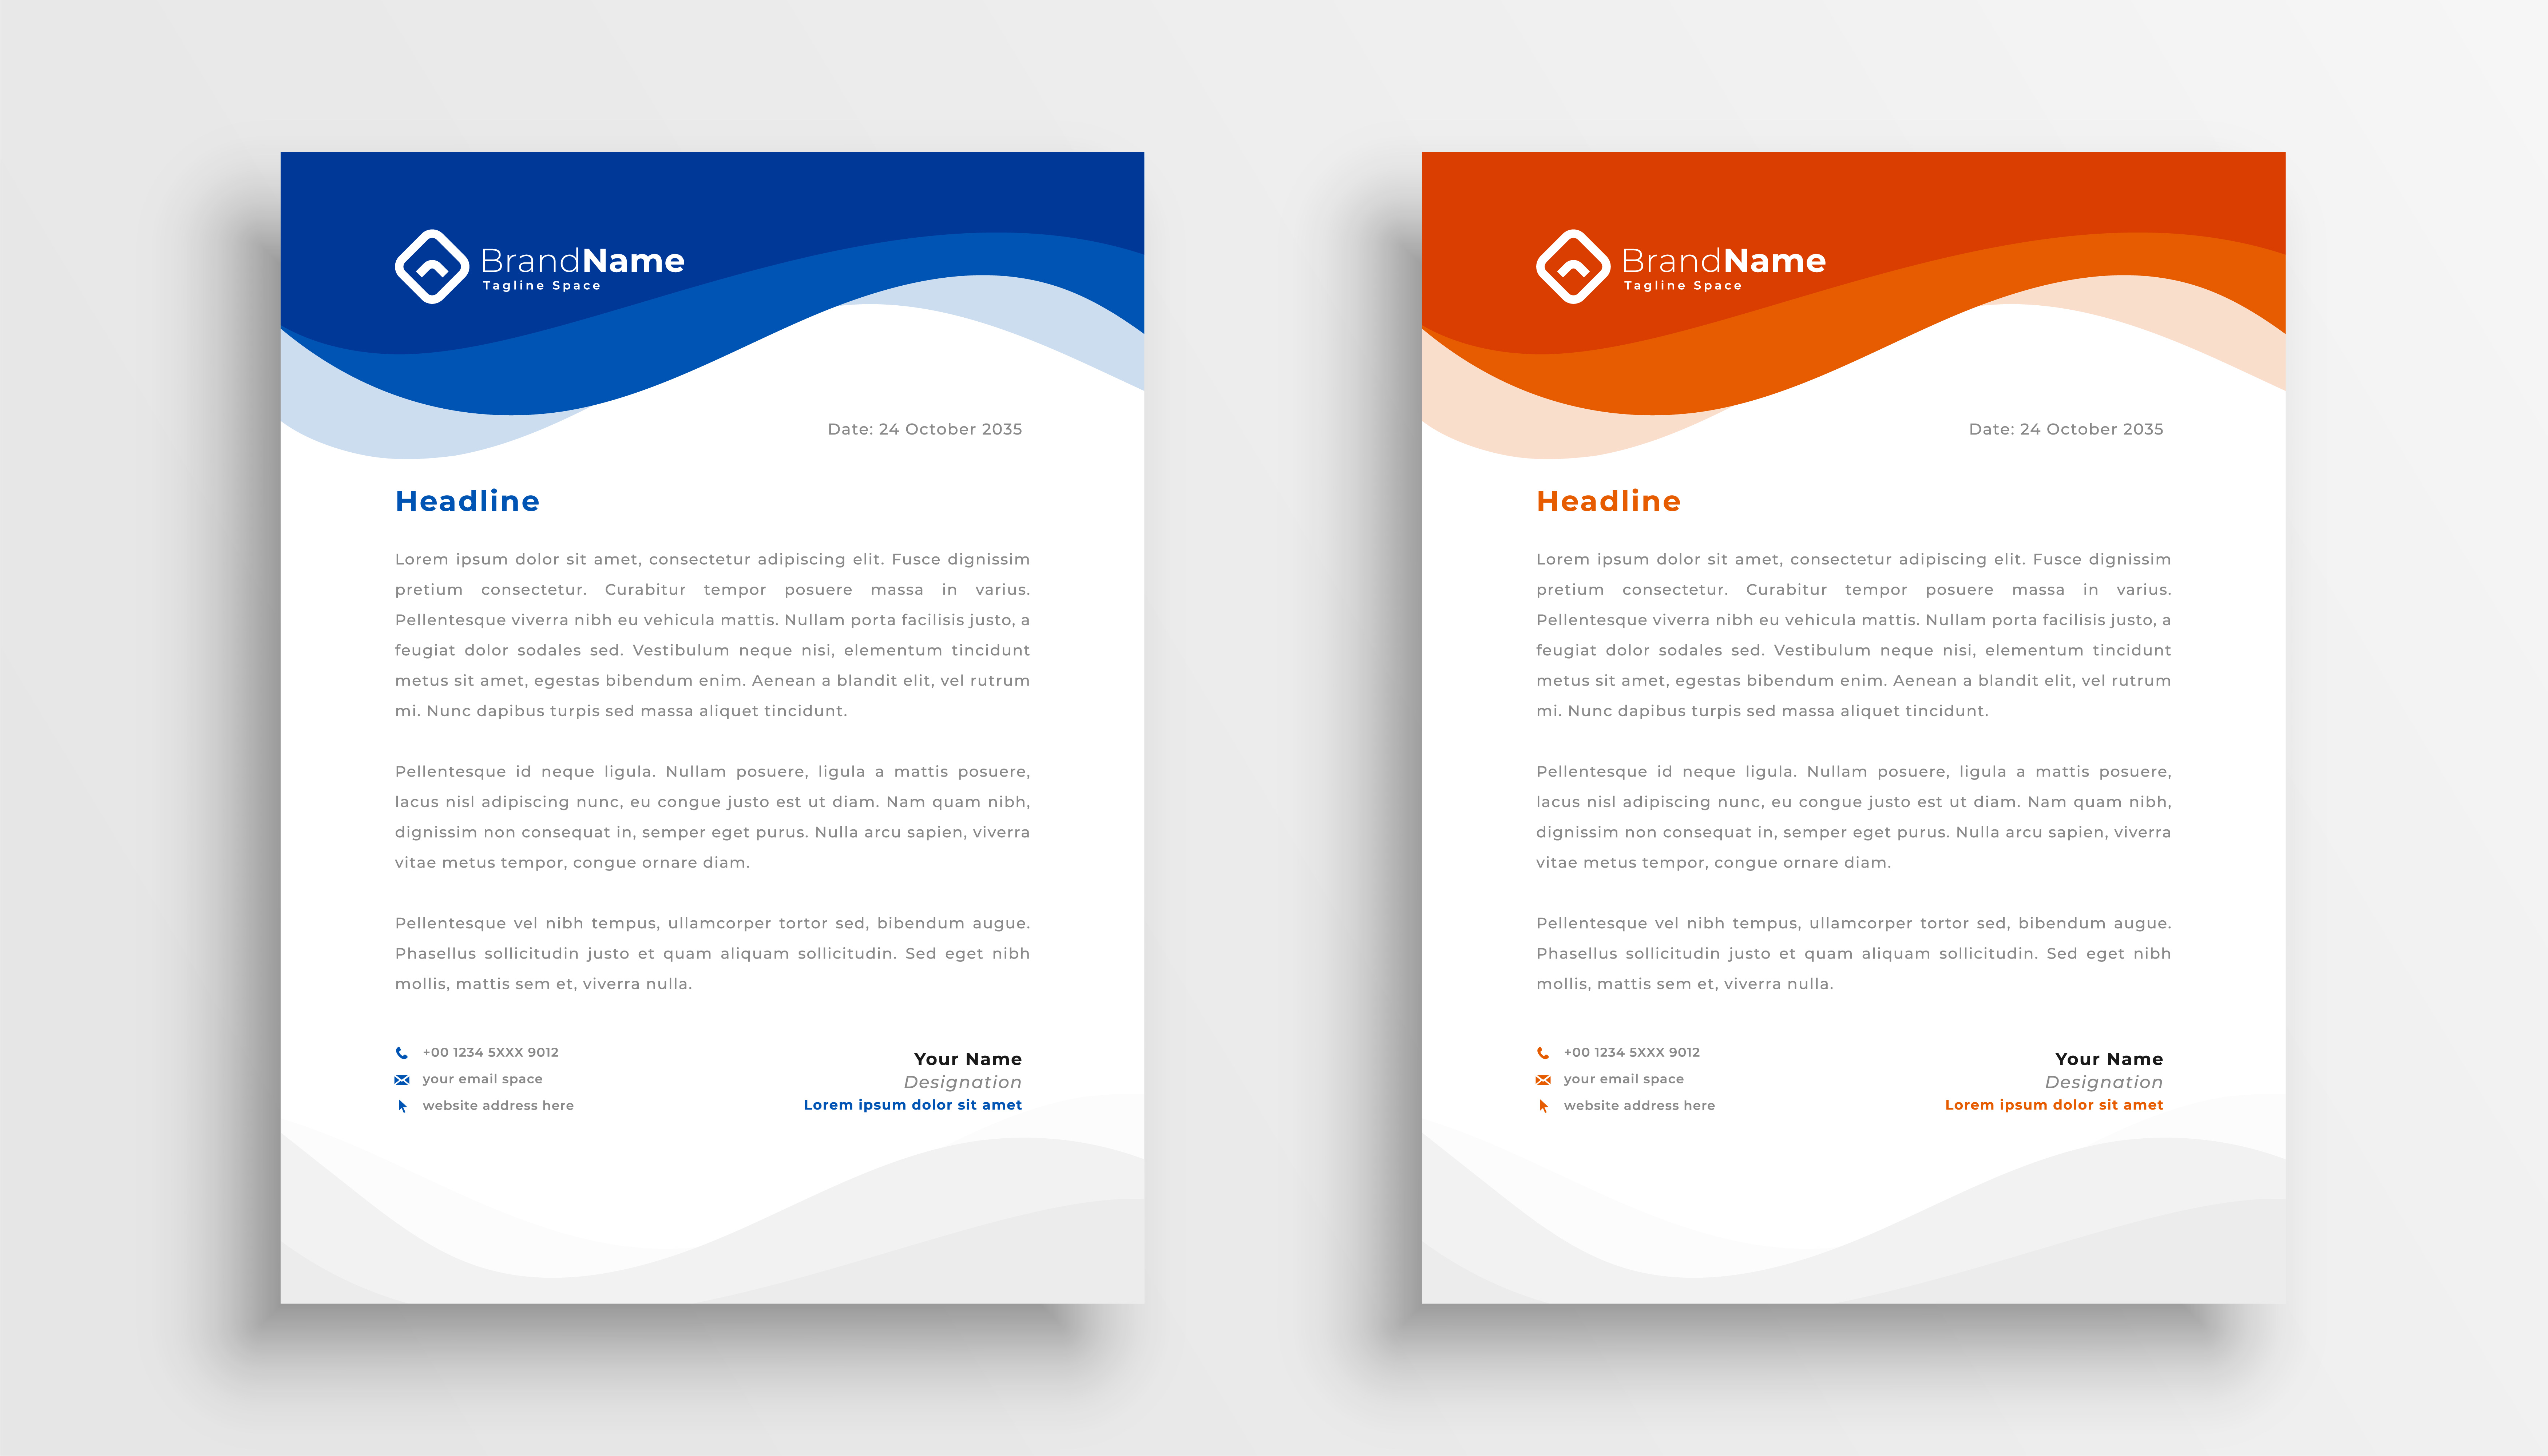 Creating a Professional Image for Your Business with Letterhead: Examples and Tips